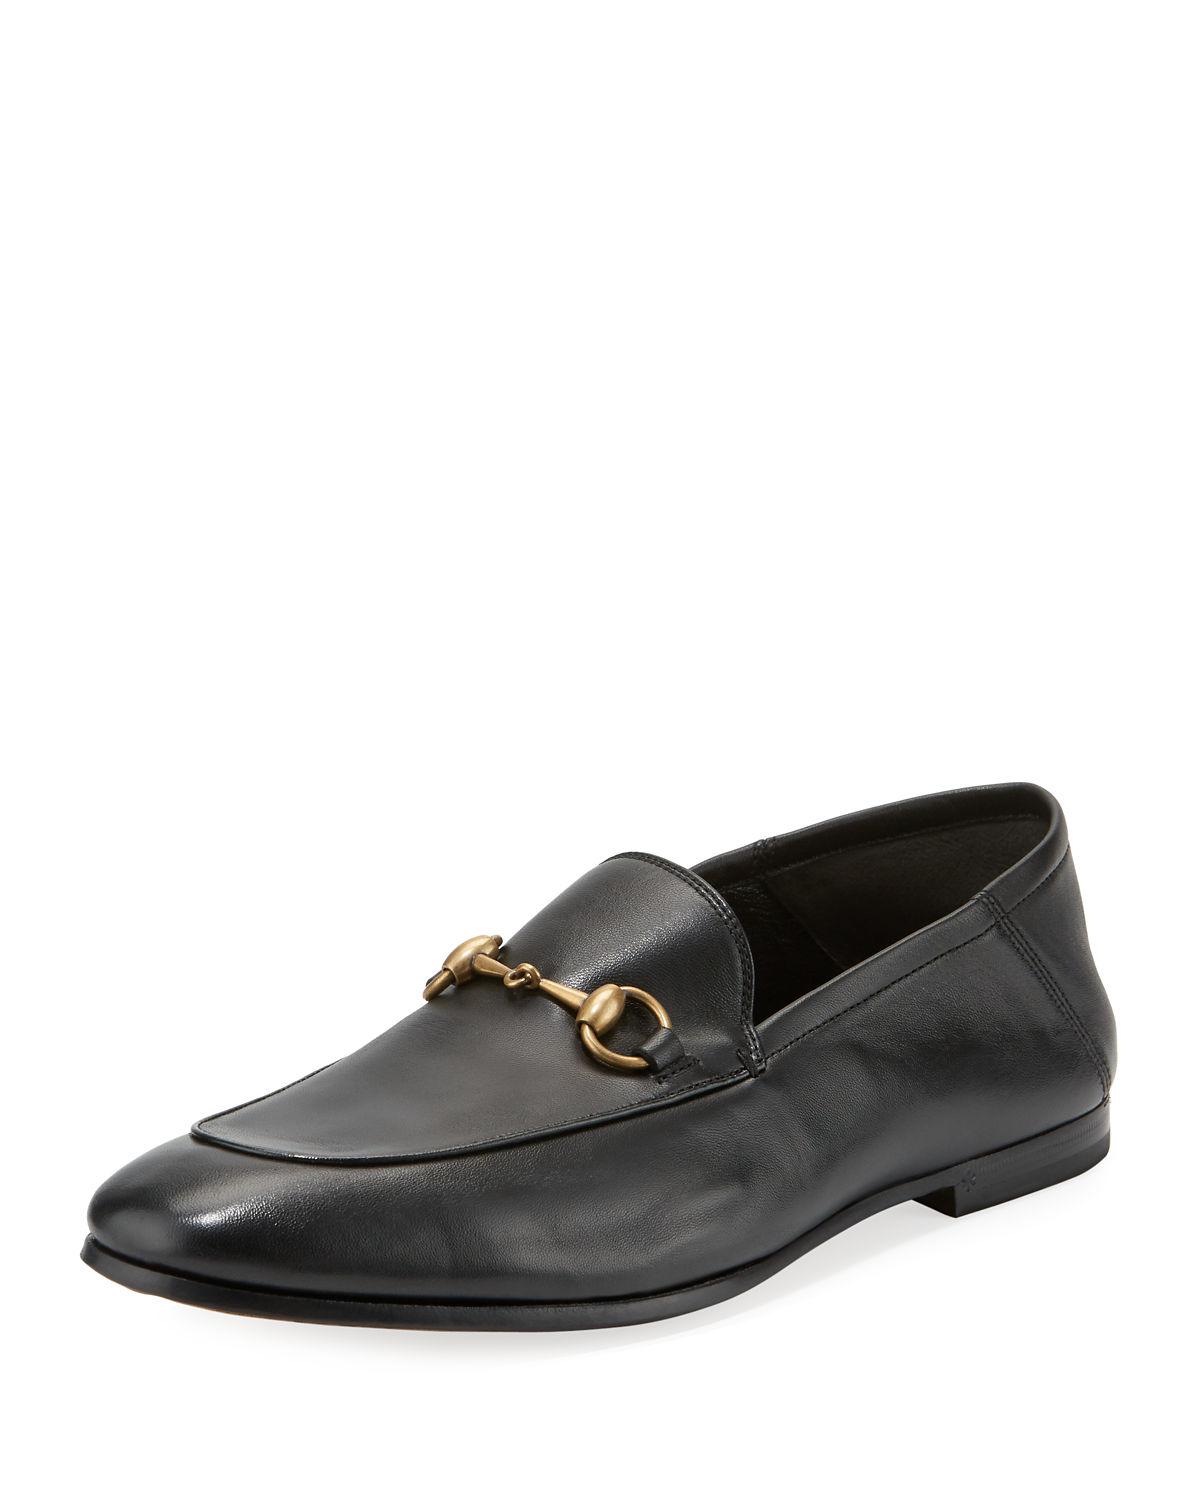 Lyst - Gucci Brixton Soft Leather Bit-strap Loafer in Black for Men